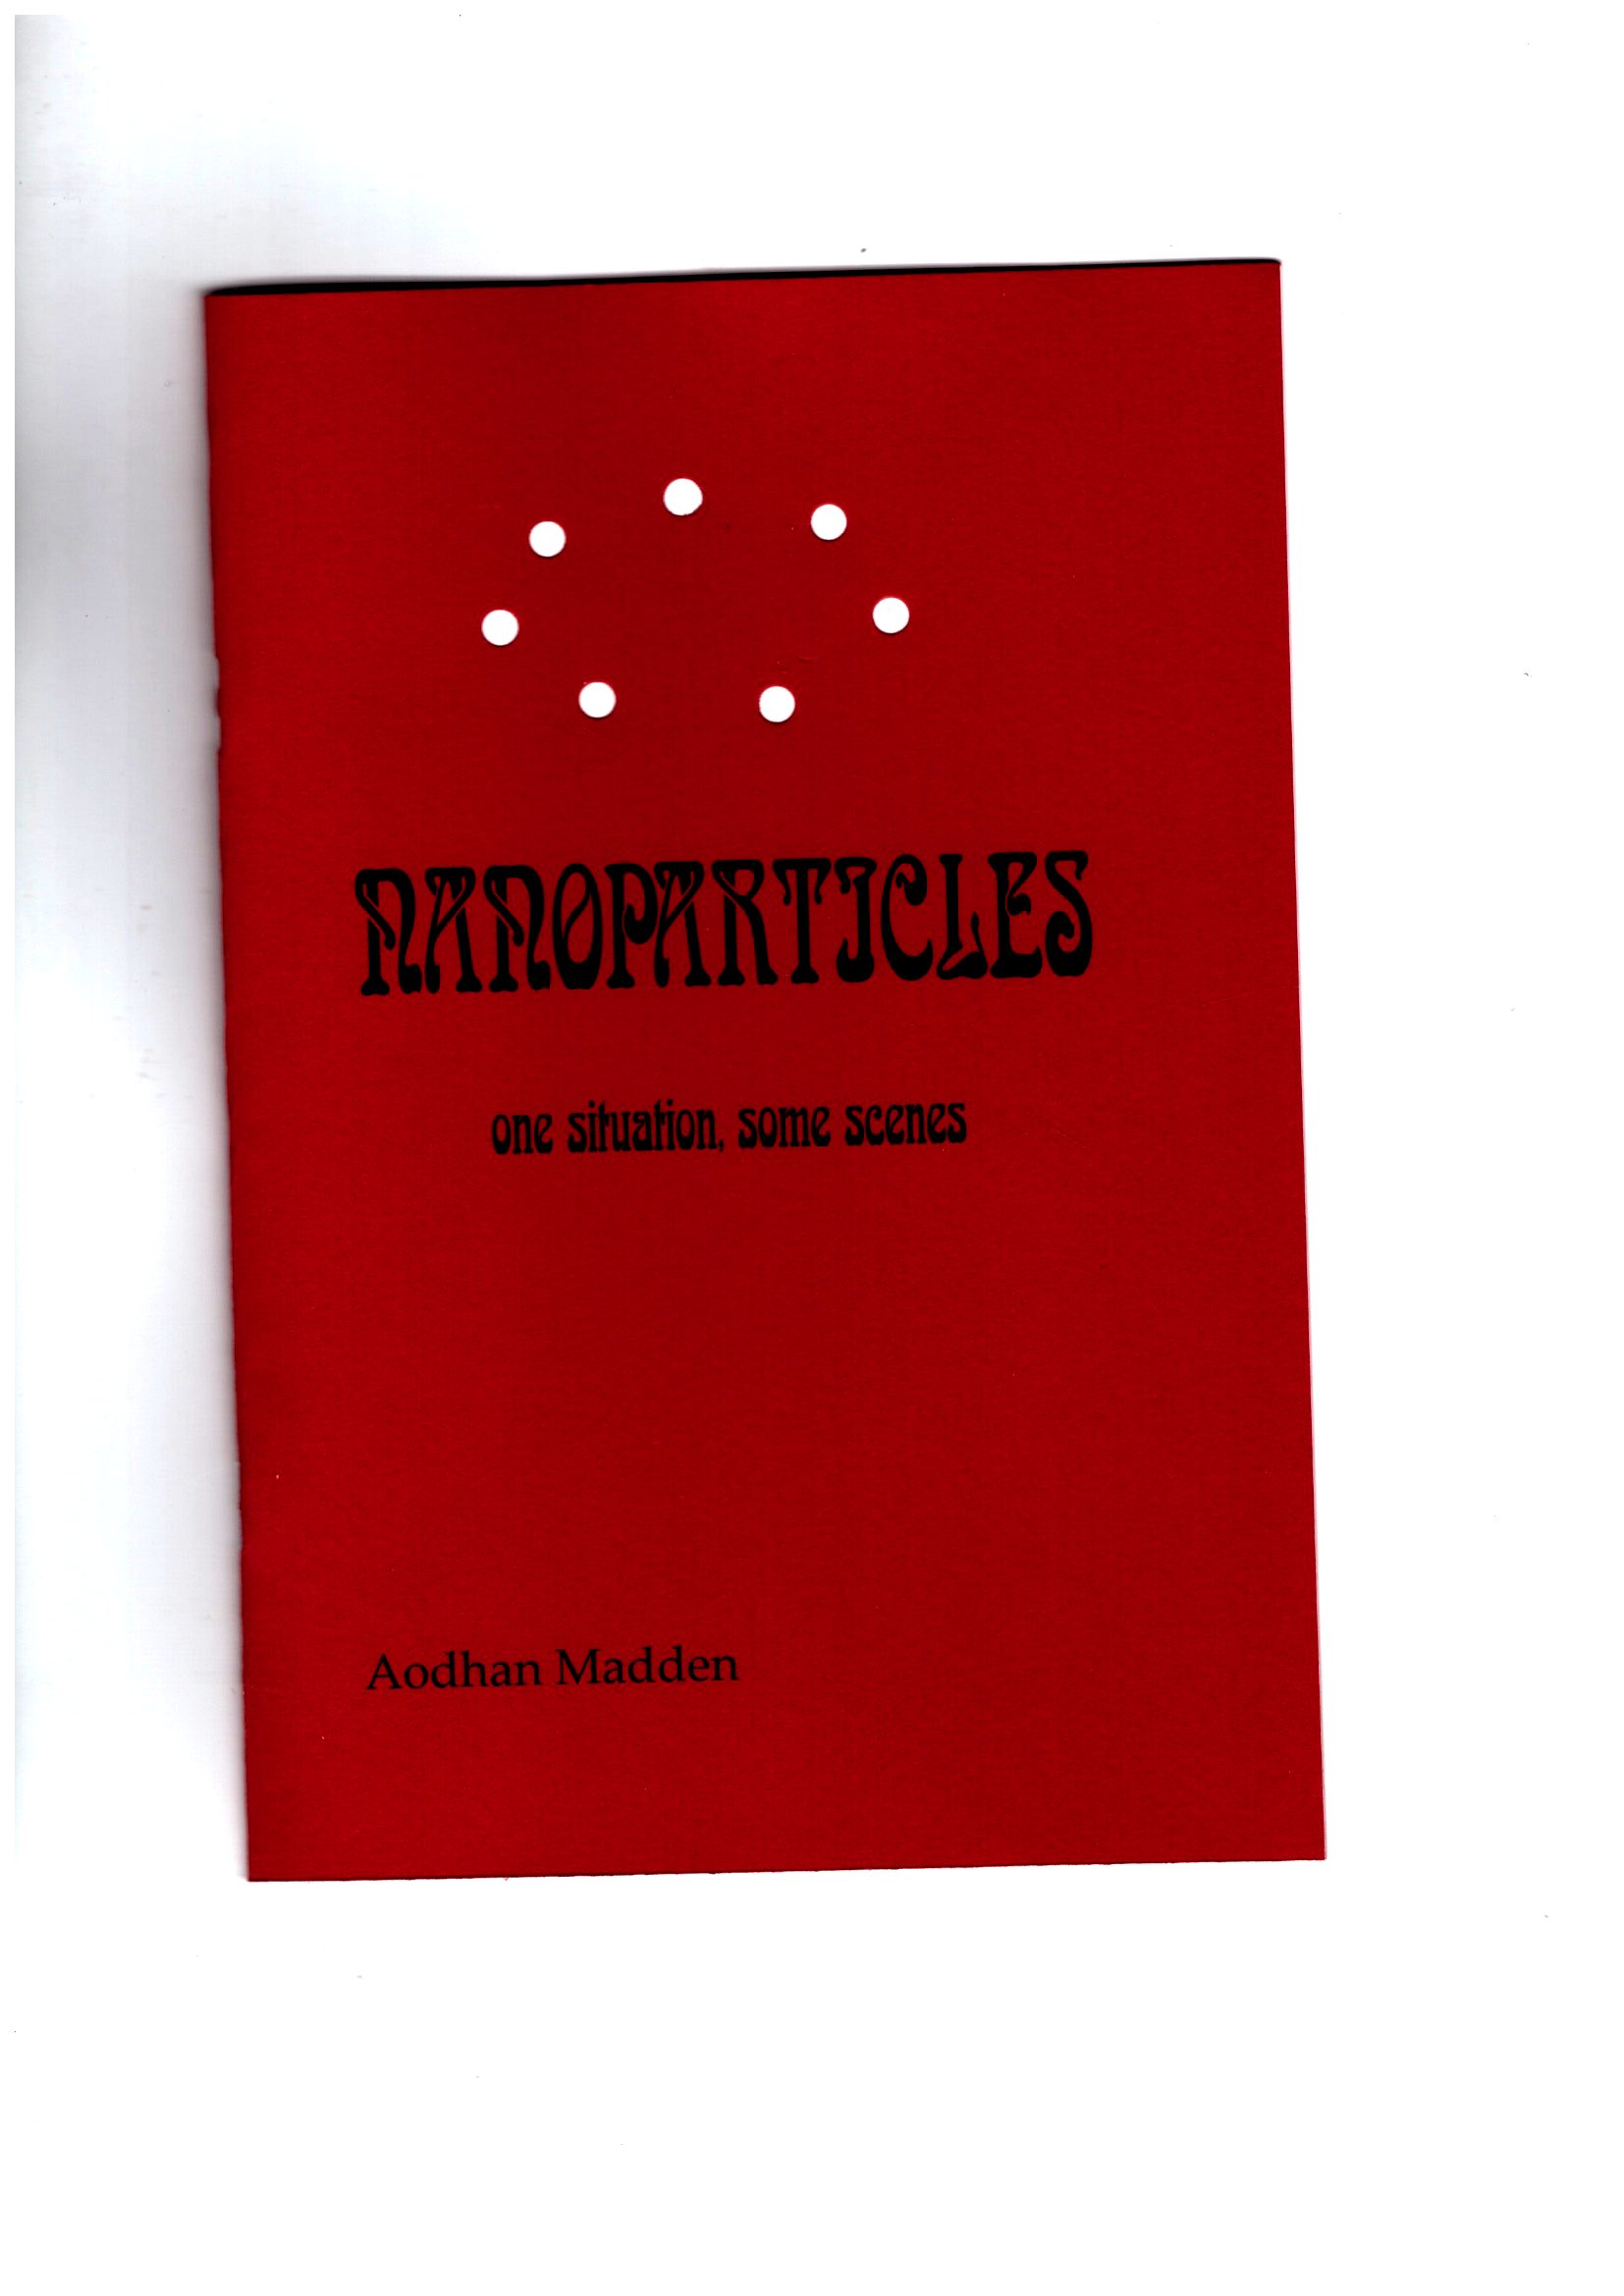 MADDEN, Aodhan - Nanoparticles. One situation, some scenes – Presage Pamphlet Series